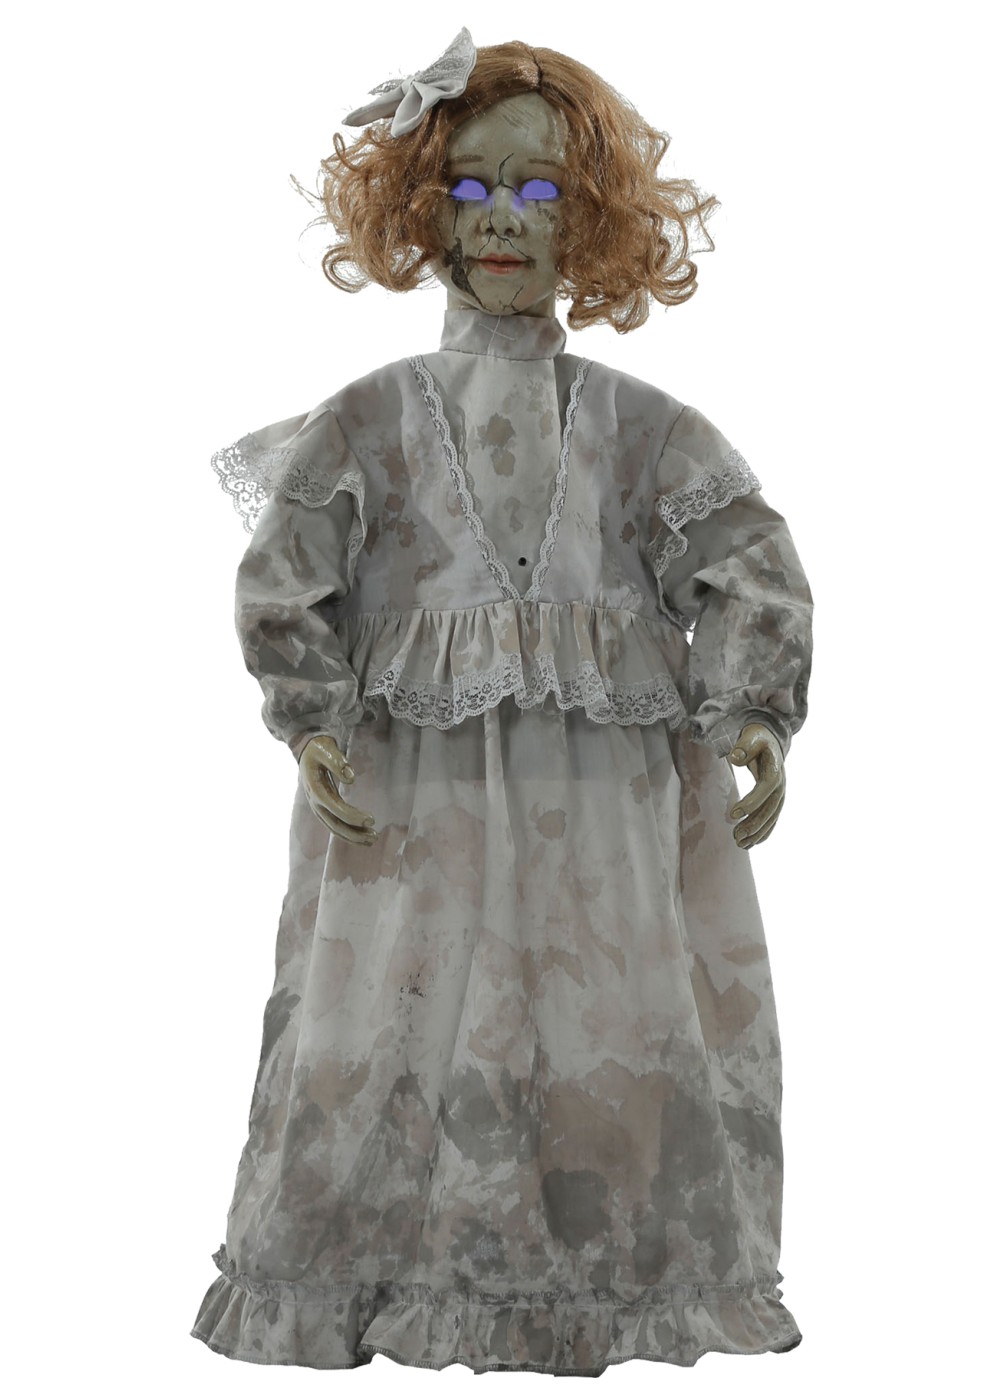 Cracked Victorian Doll Prop